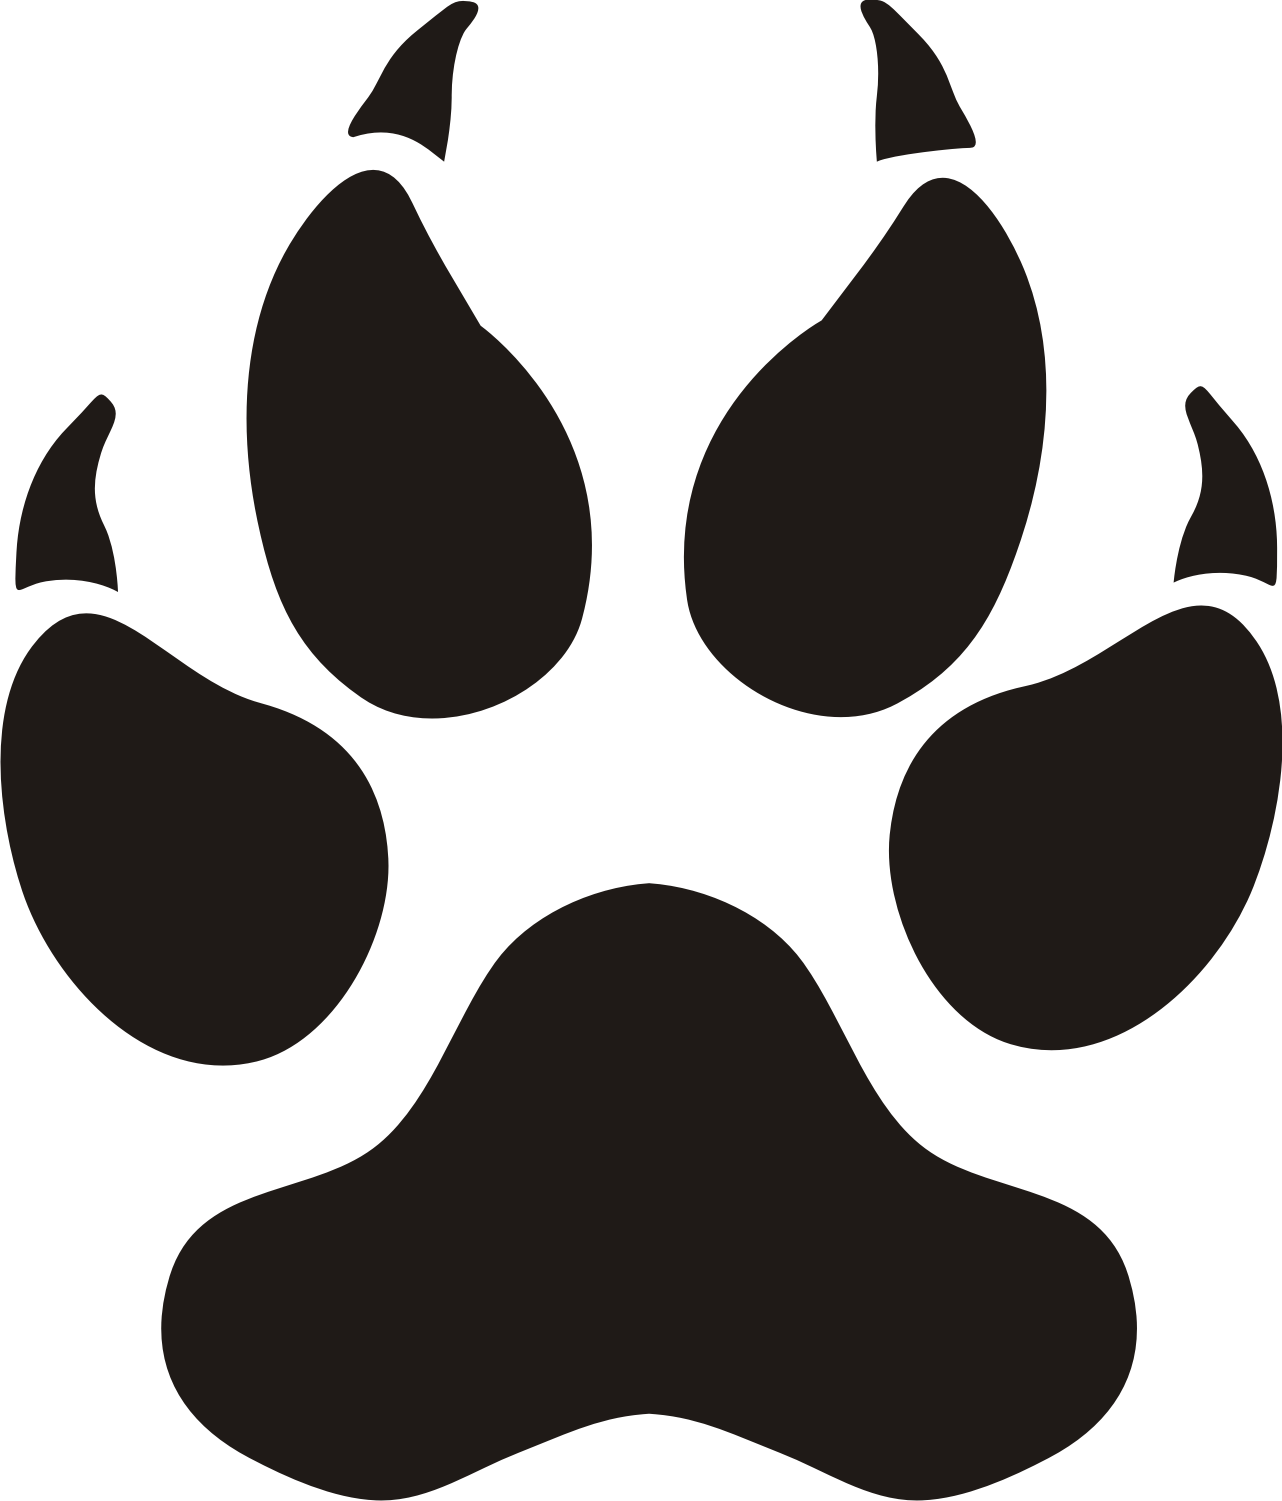 Vector Paw Prints - Clipart library